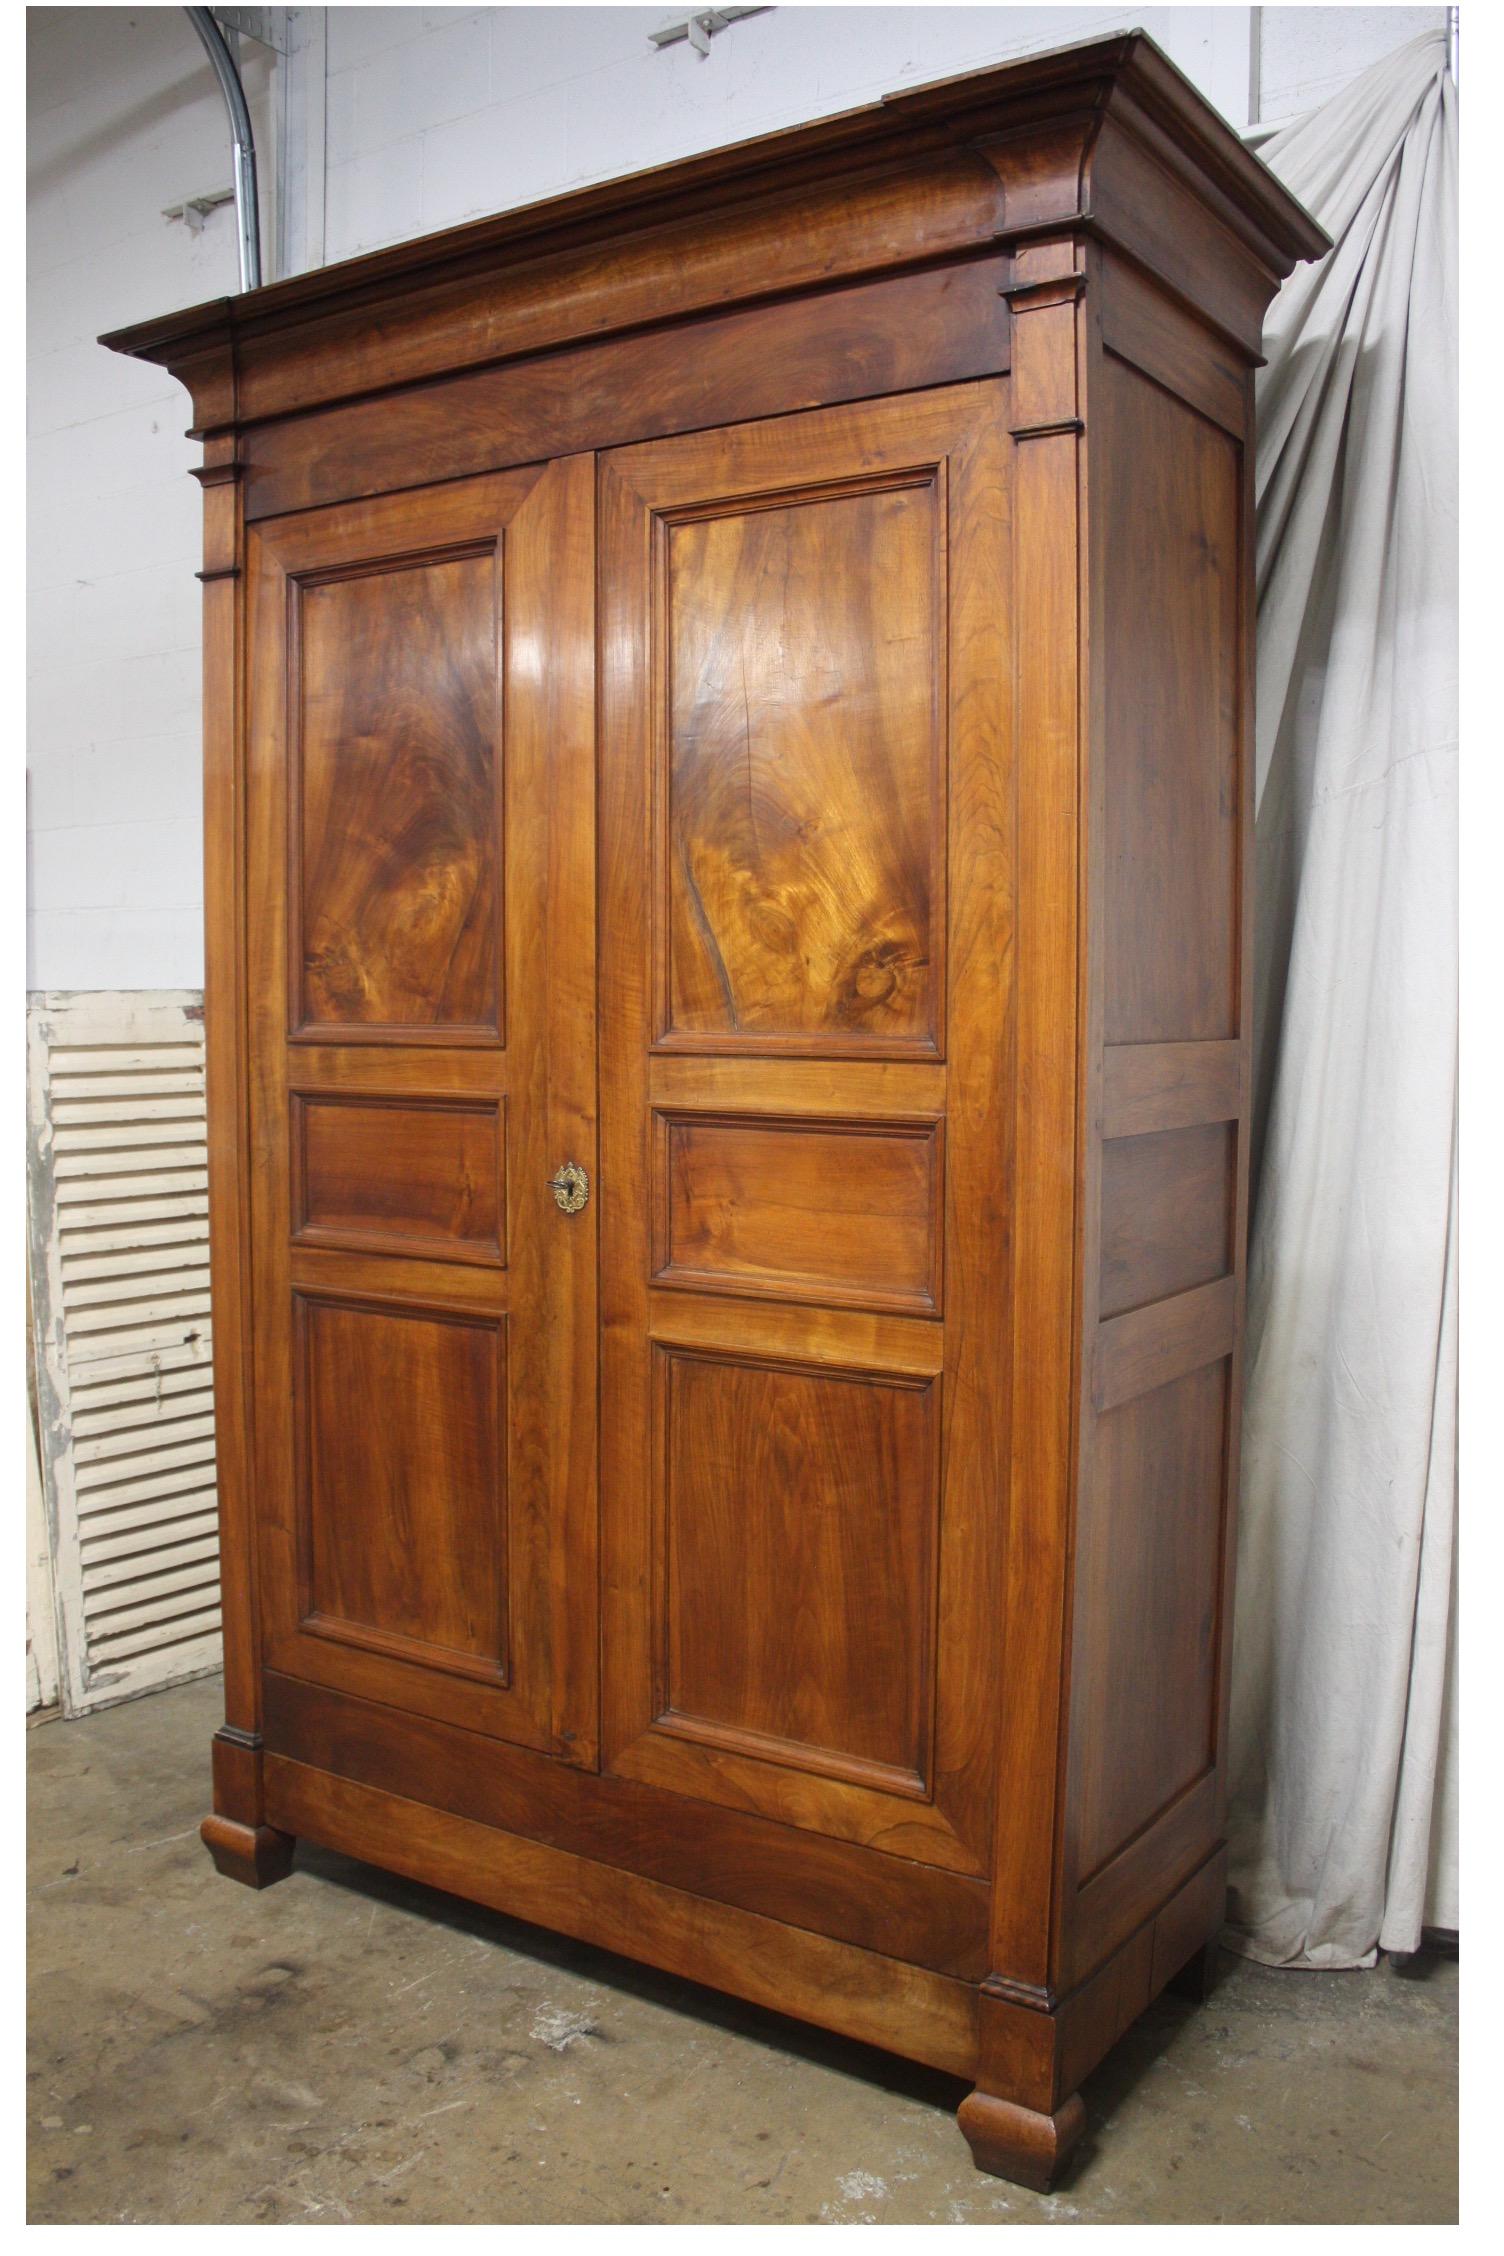 Refined 19th century French armoire.